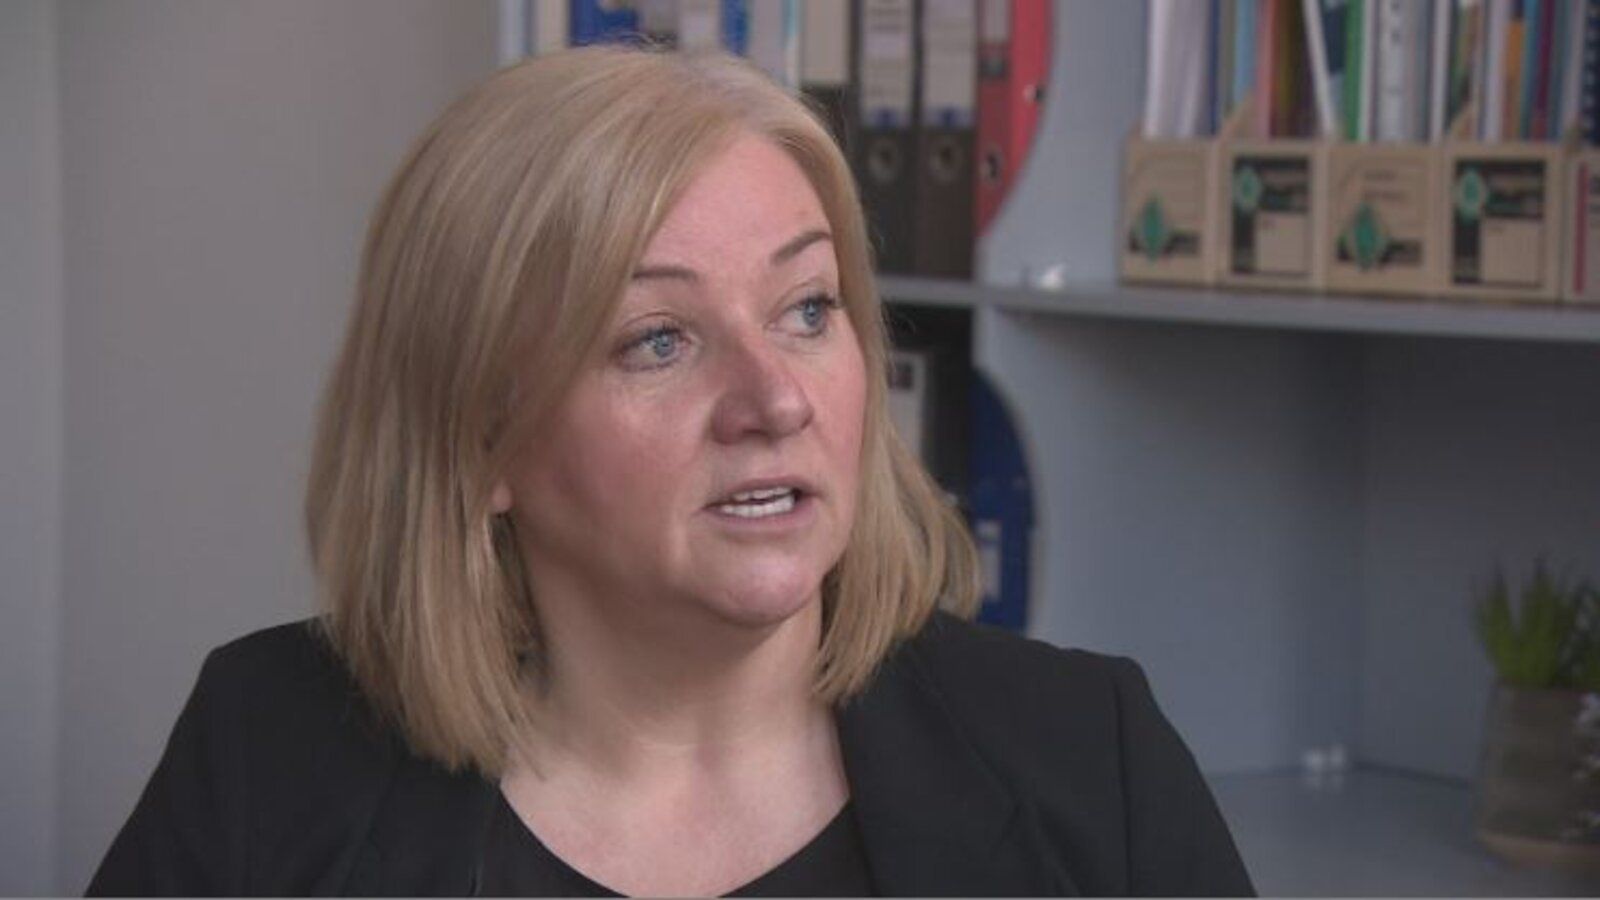 Jacki Smart, the CEO of Accord Hospice, says the sector is facing the combined challenge of increasing costs, and tougher recruitment